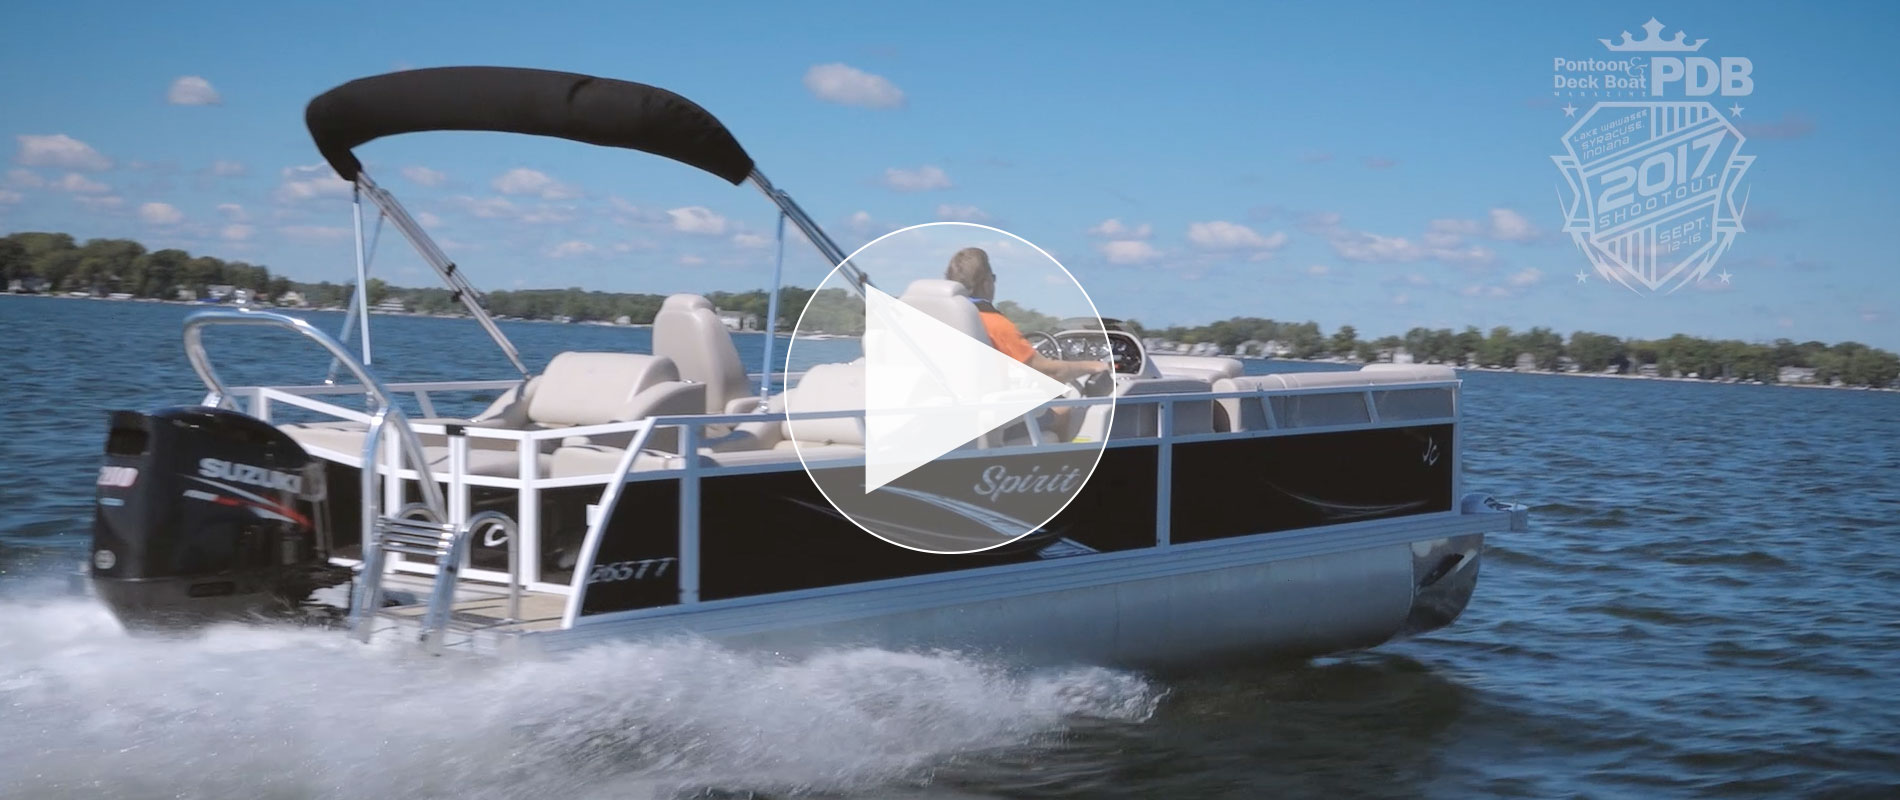 View Video of the Pontoon & Deck Boat Magazine 2017 Shootout featuring the Spirit 265TT RFL